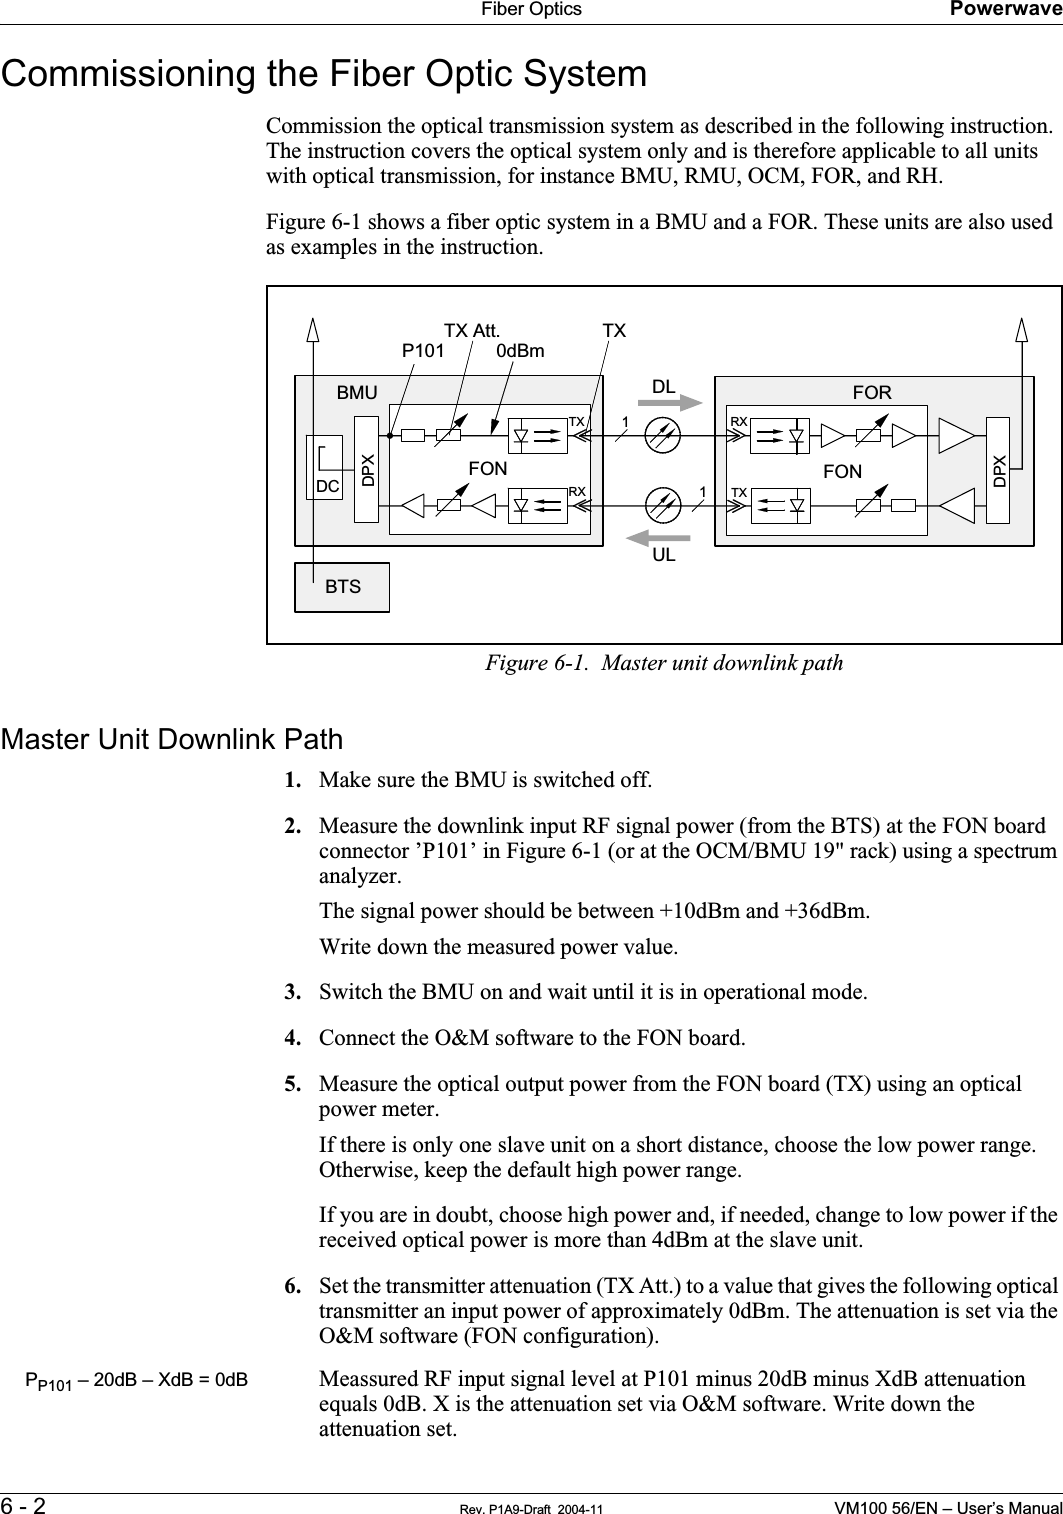 Fiber Optics Powerwave6 - 2 Rev. P1A9-Draft  2004-11 VM100 56/EN – User’s ManualCommissioning the Fiber Optic SystemCommission the optical transmission system as described in the following instruction. The instruction covers the optical system only and is therefore applicable to all units with optical transmission, for instance BMU, RMU, OCM, FOR, and RH.Figure 6-1 shows a fiber optic system in a BMU and a FOR. These units are also used as examples in the instruction.Figure 6-1.  Master unit downlink pathMaster Unit Downlink Path1. Make sure the BMU is switched off.2. Measure the downlink input RF signal power (from the BTS) at the FON board connector ’P101’ in Figure 6-1 (or at the OCM/BMU 19&quot; rack) using a spectrum analyzer.The signal power should be between +10dBm and +36dBm.Write down the measured power value.3. Switch the BMU on and wait until it is in operational mode.4. Connect the O&amp;M software to the FON board.5. Measure the optical output power from the FON board (TX) using an optical power meter.If there is only one slave unit on a short distance, choose the low power range. Otherwise, keep the default high power range.If you are in doubt, choose high power and, if needed, change to low power if the received optical power is more than 4dBm at the slave unit.6. Set the transmitter attenuation (TX Att.) to a value that gives the following optical transmitter an input power of approximately 0dBm. The attenuation is set via the O&amp;M software (FON configuration).PP101 – 20dB – XdB = 0dB Meassured RF input signal level at P101 minus 20dB minus XdB attenuation equals 0dB. X is the attenuation set via O&amp;M software. Write down the attenuation set.BTSBMUFONDC FONFORP101TX Att.0dBmTX1TXRX1TX RXDPXULDLDPX